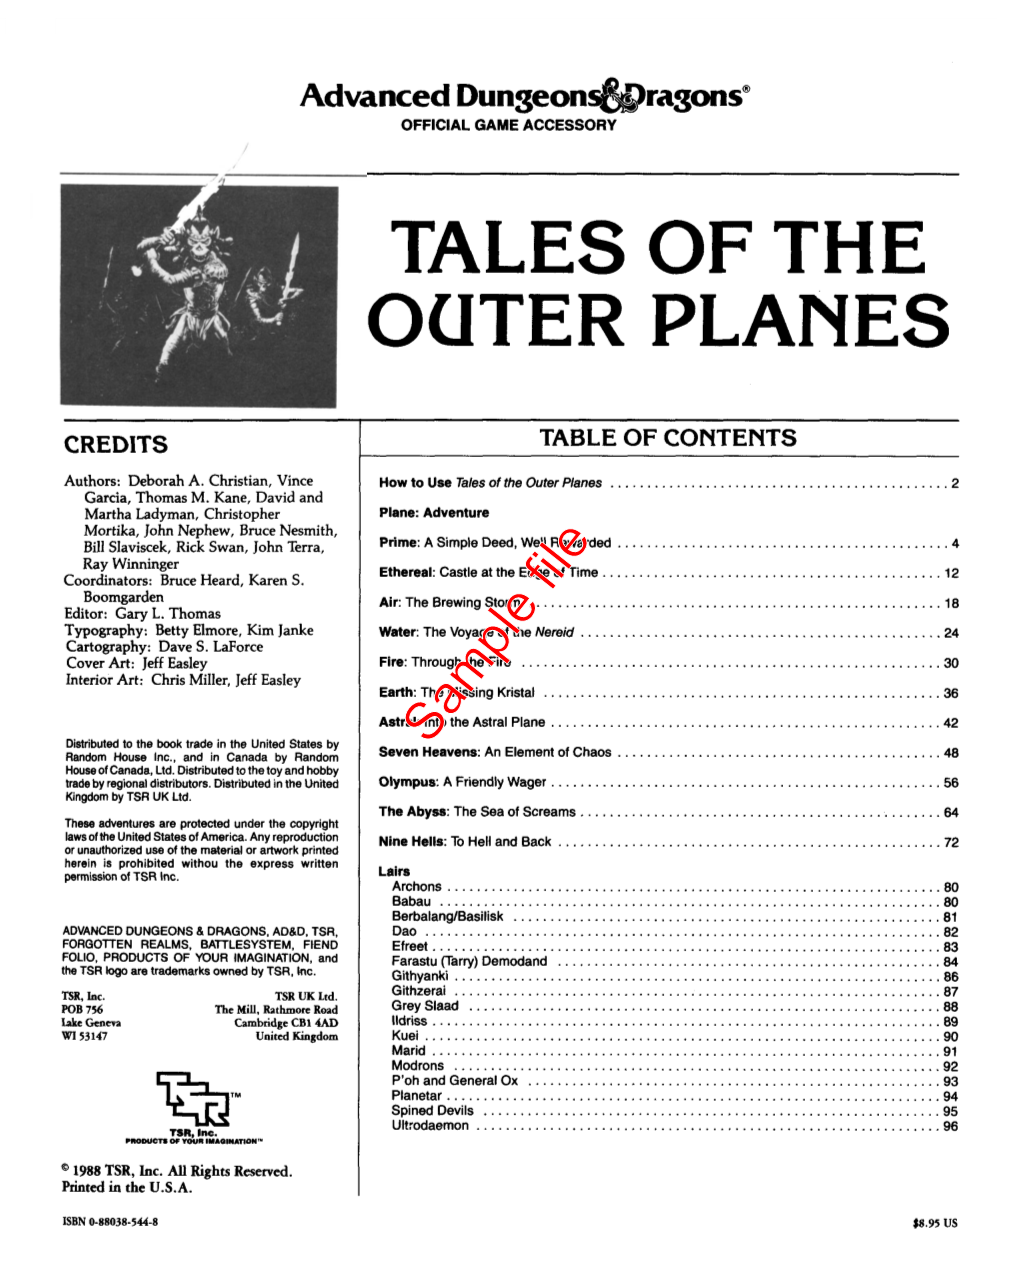 Tales of the Outer Planes